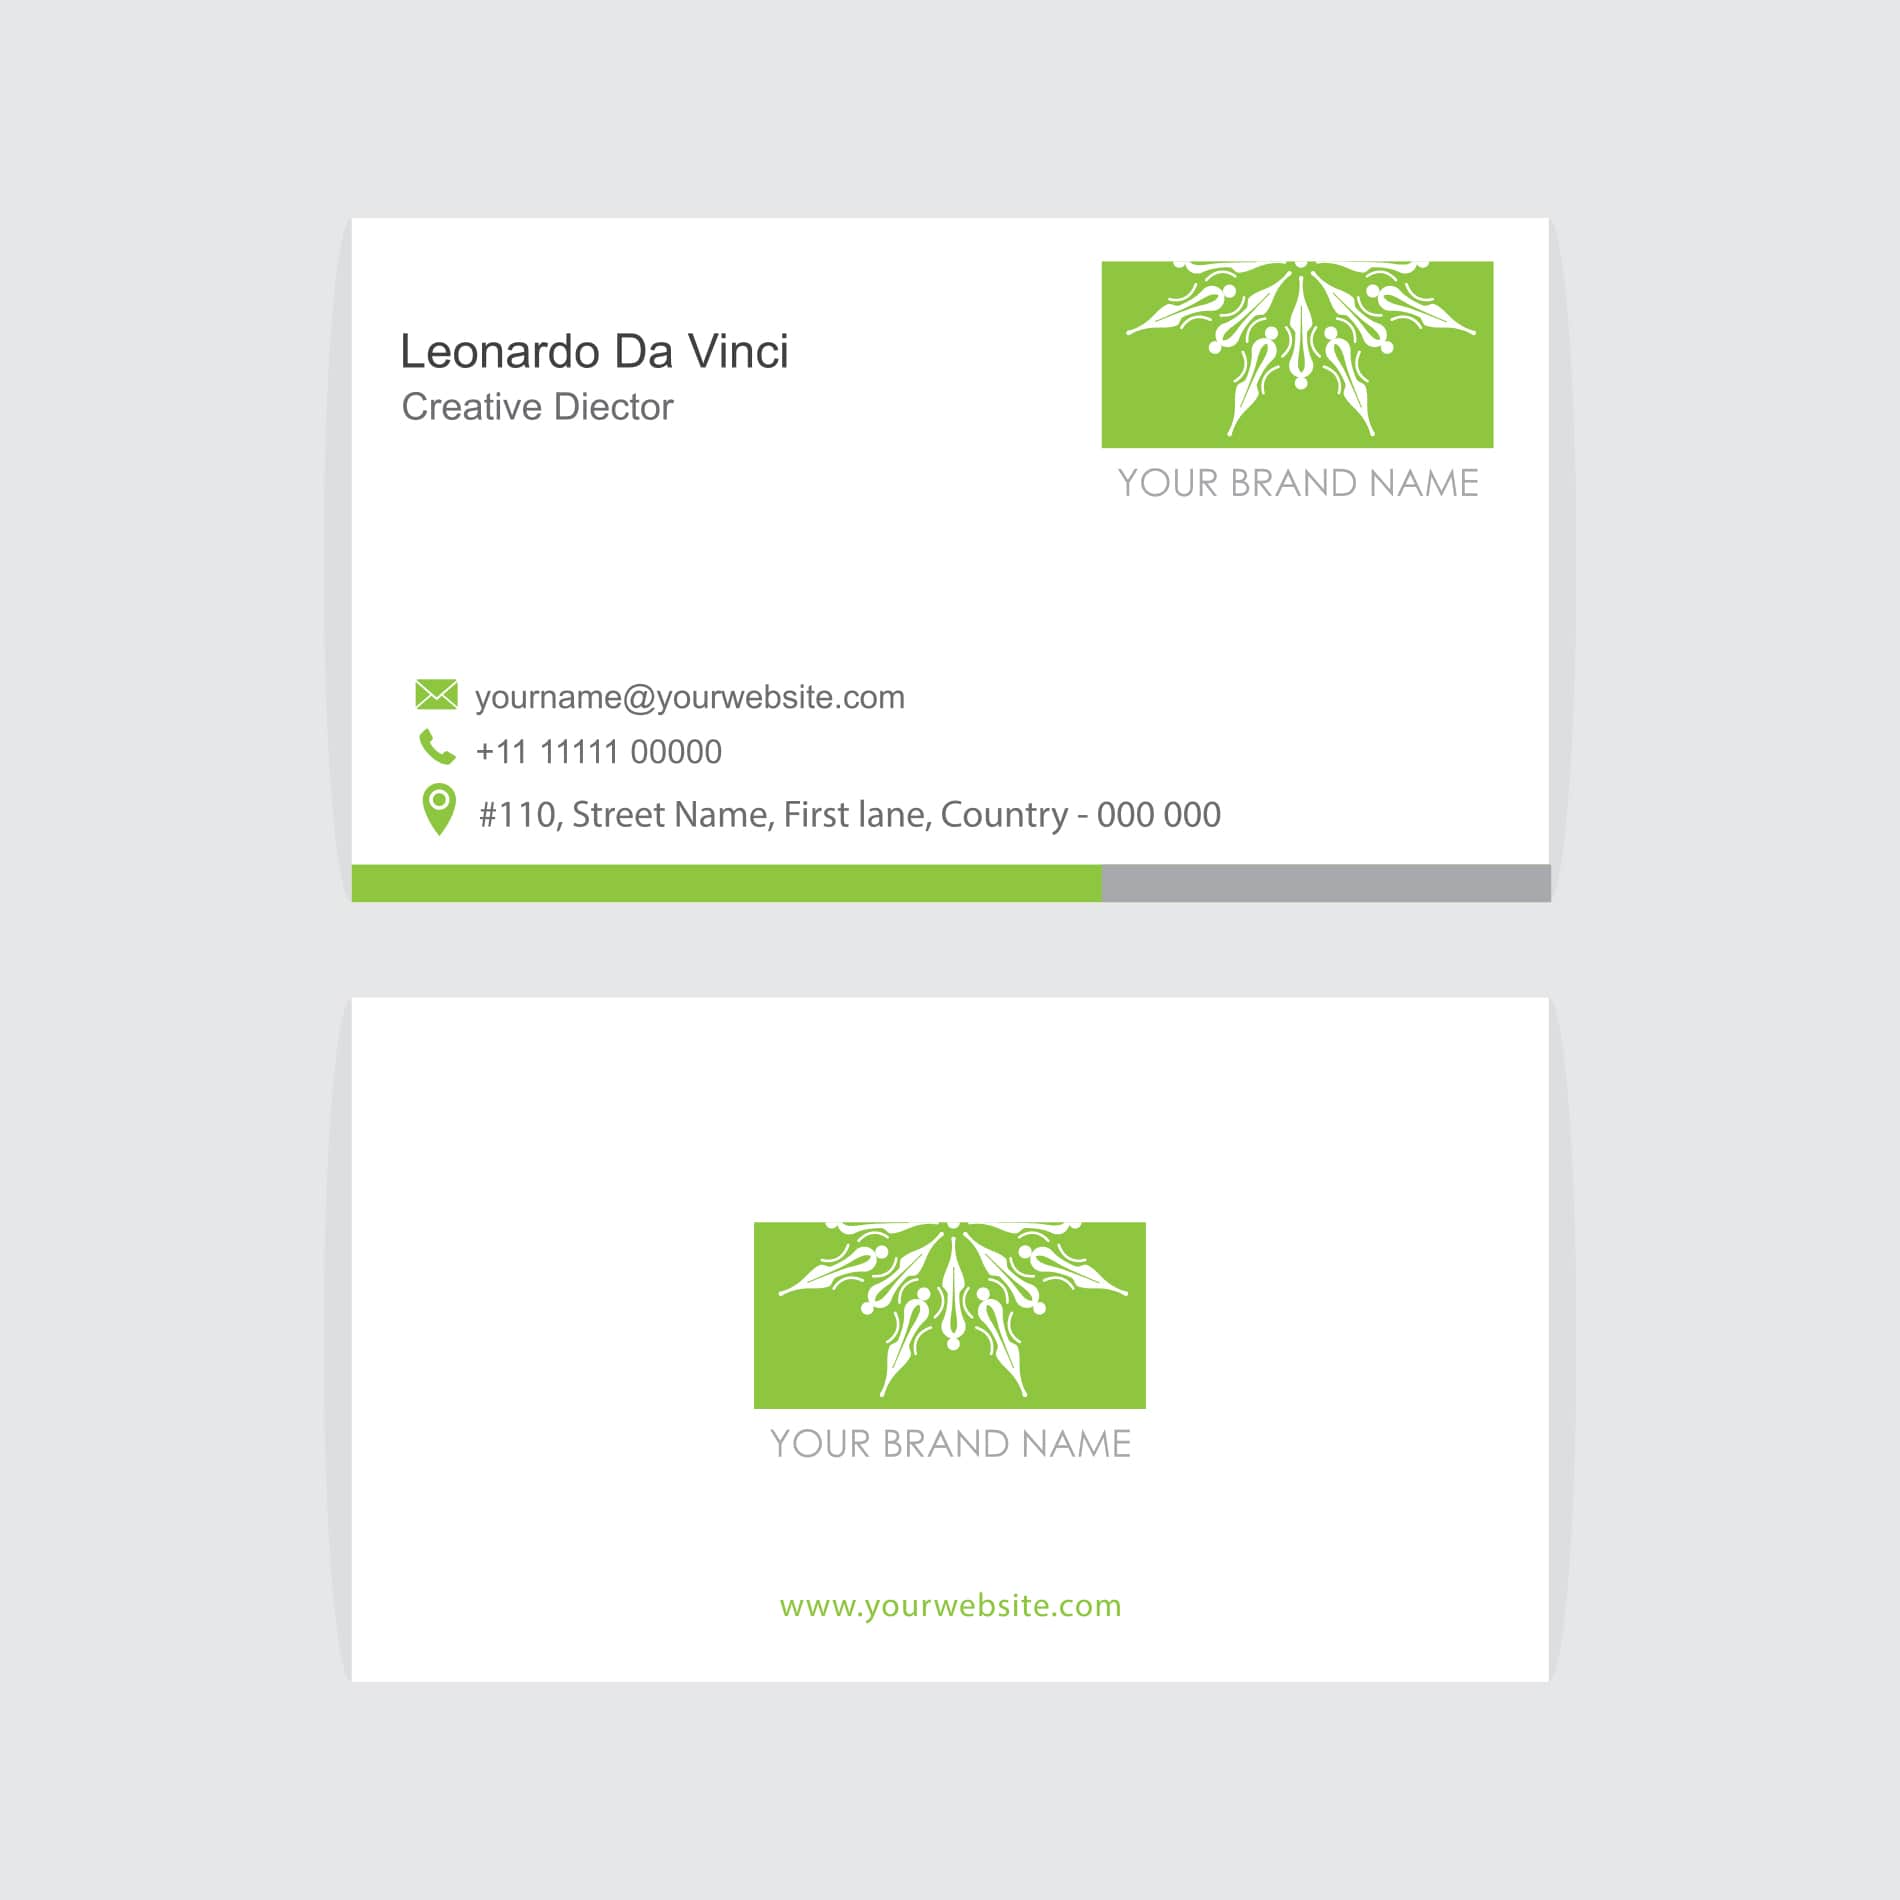 Clean and green business card template Free vector in ai, eps10 and svg format